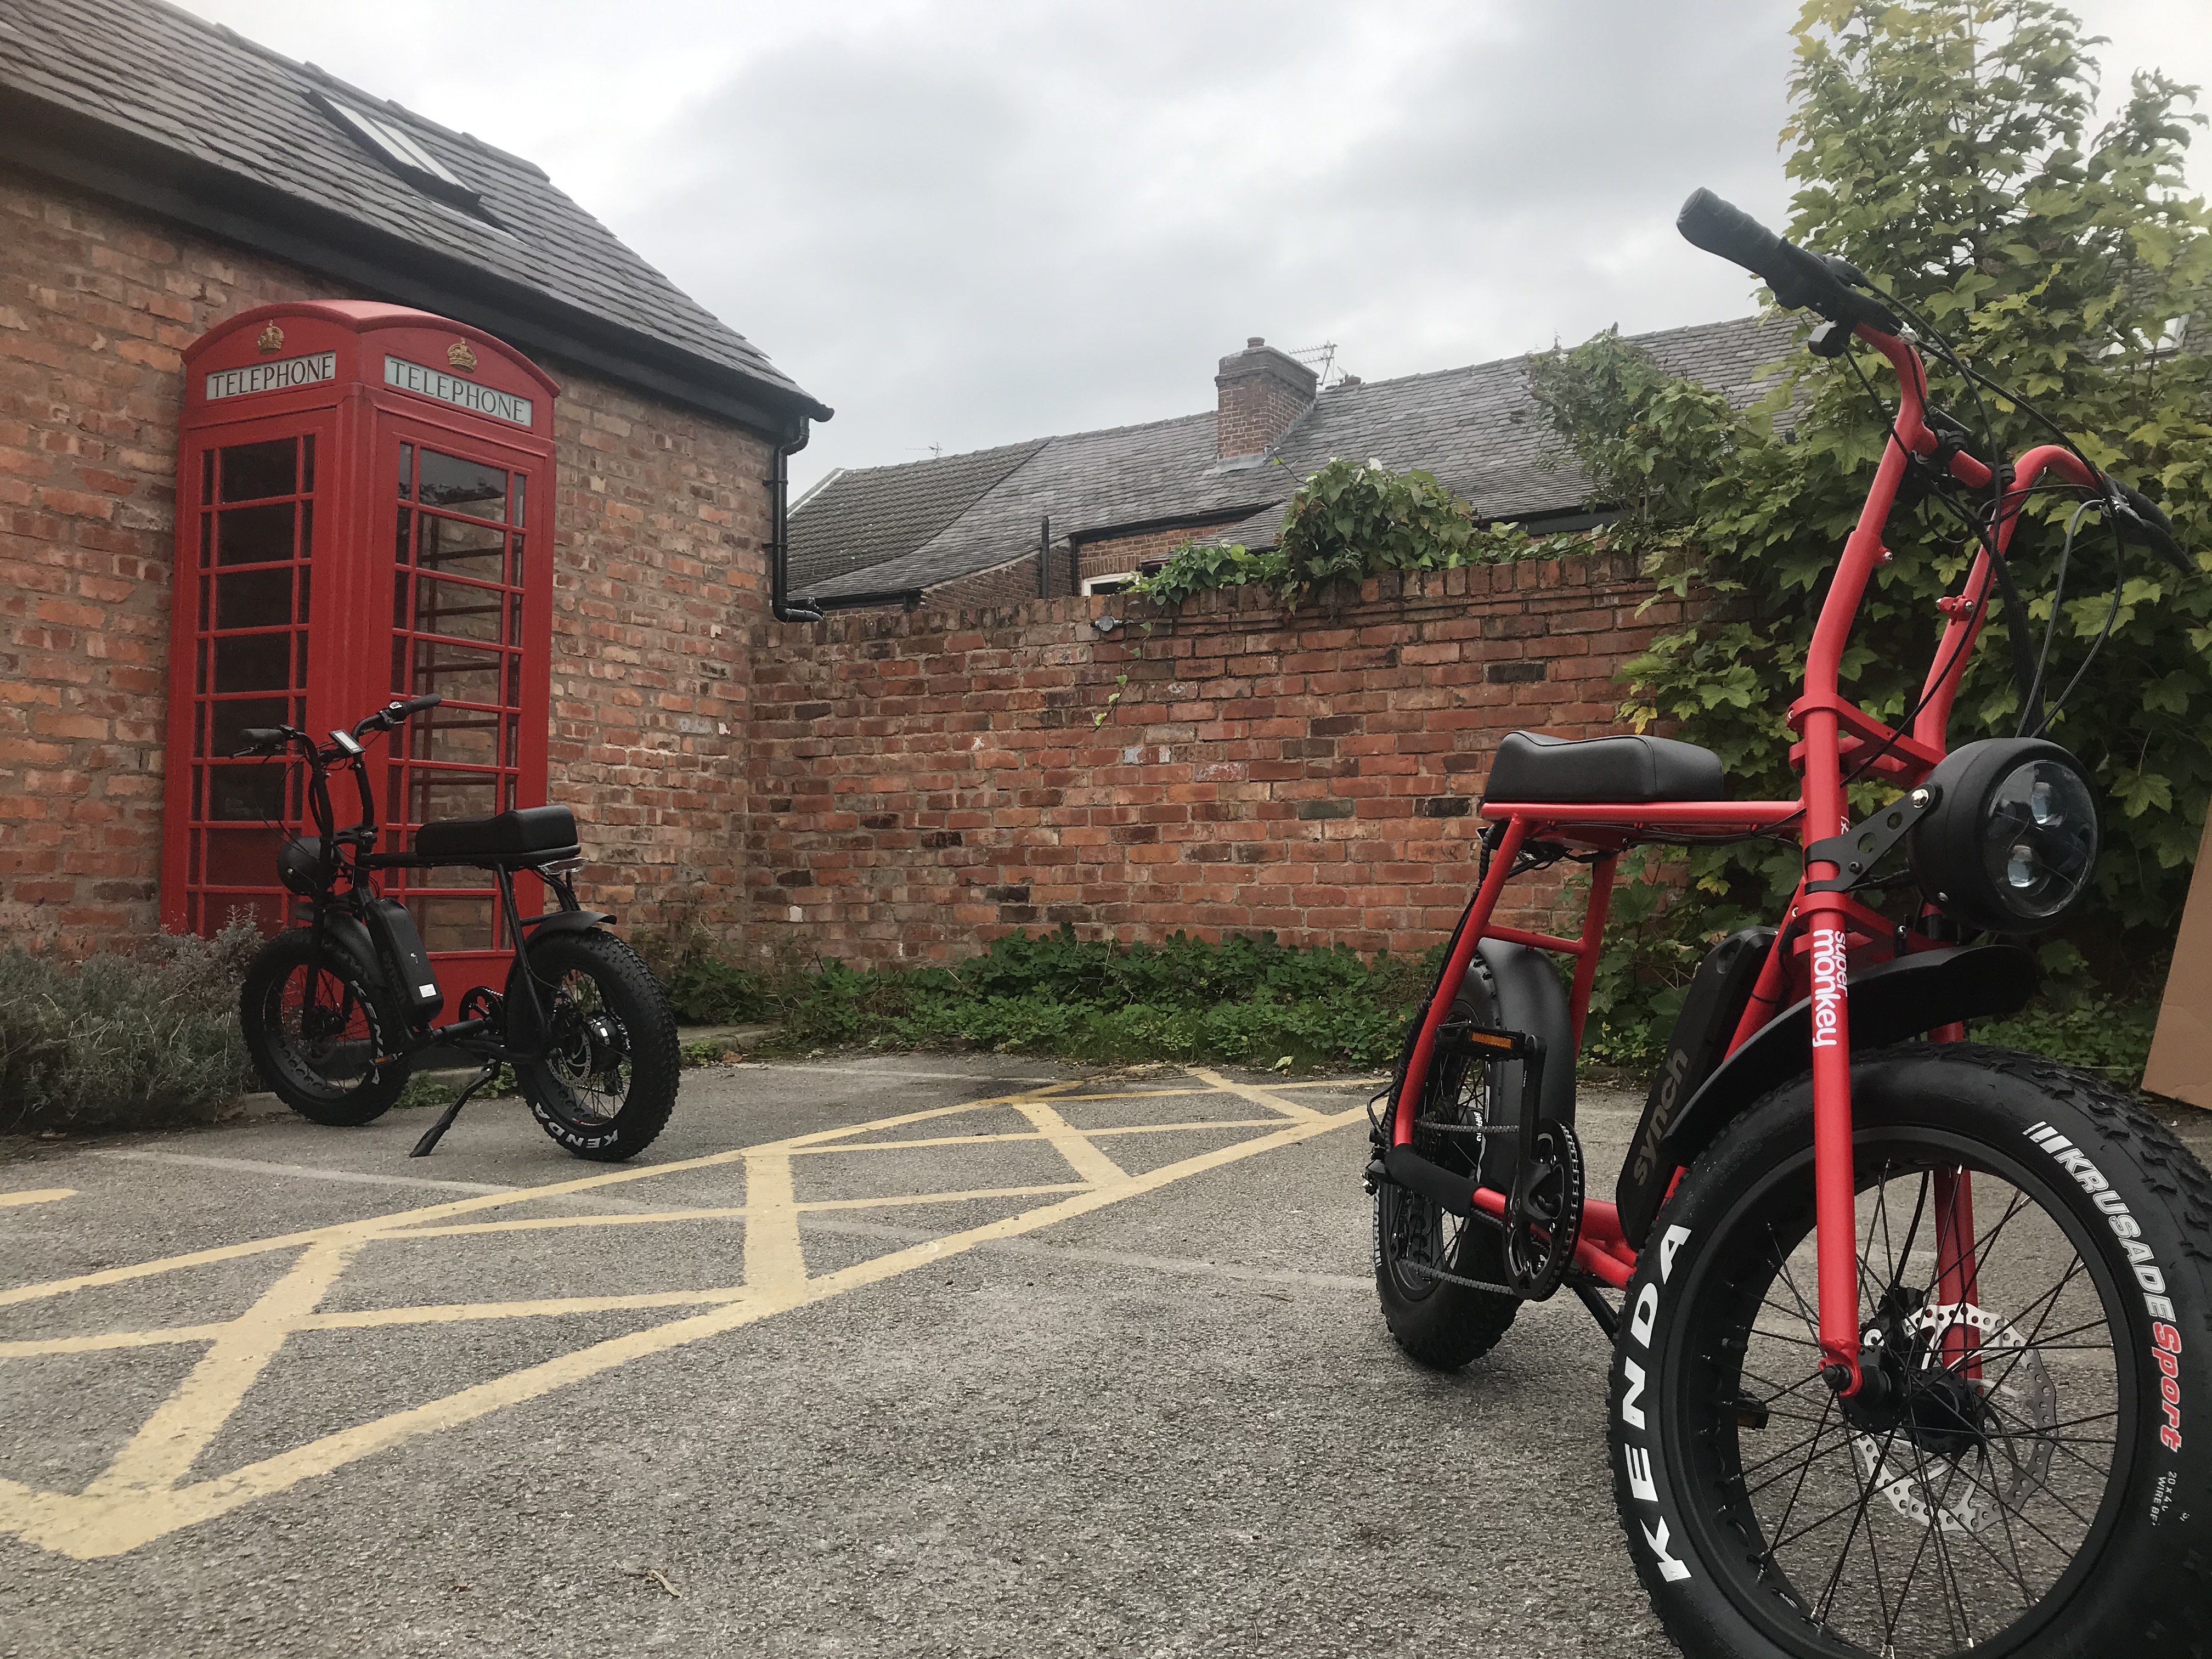 Test Ride your New EBike at Moor EBikes